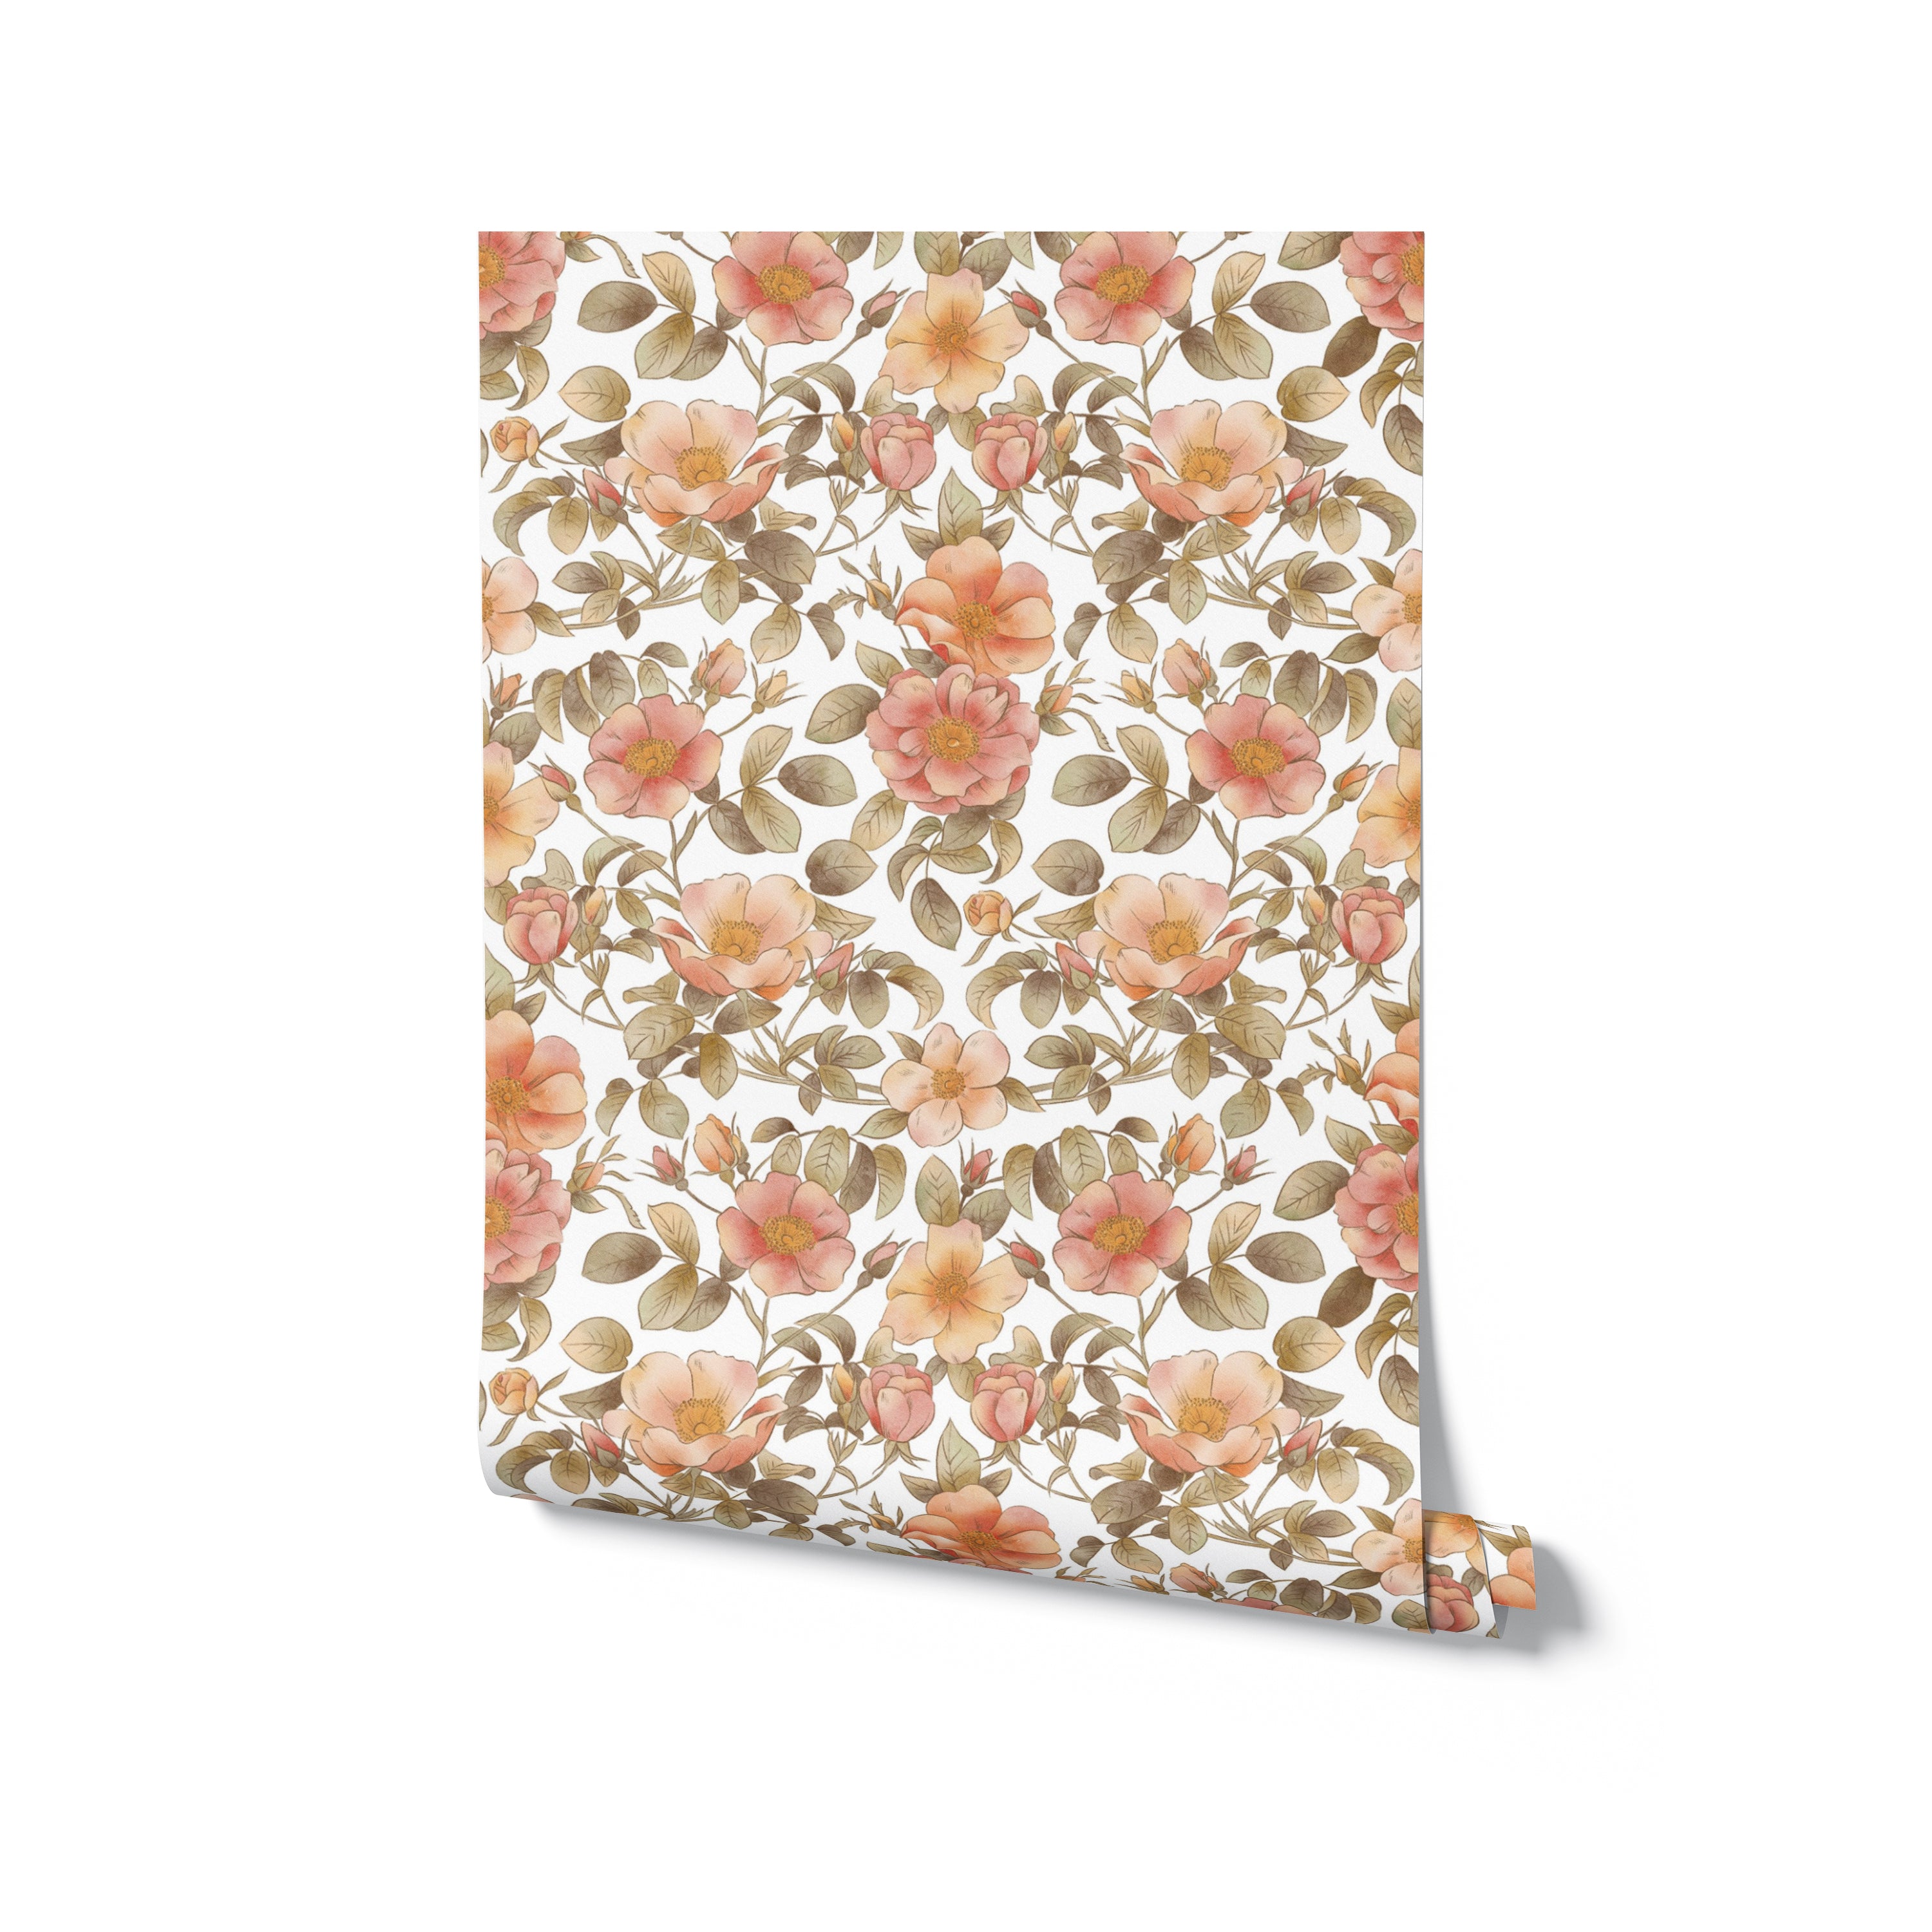 Detailed view of Garden Prairie Watercolour Wallpaper with lush watercolor flowers in pastel peach and brown hues.